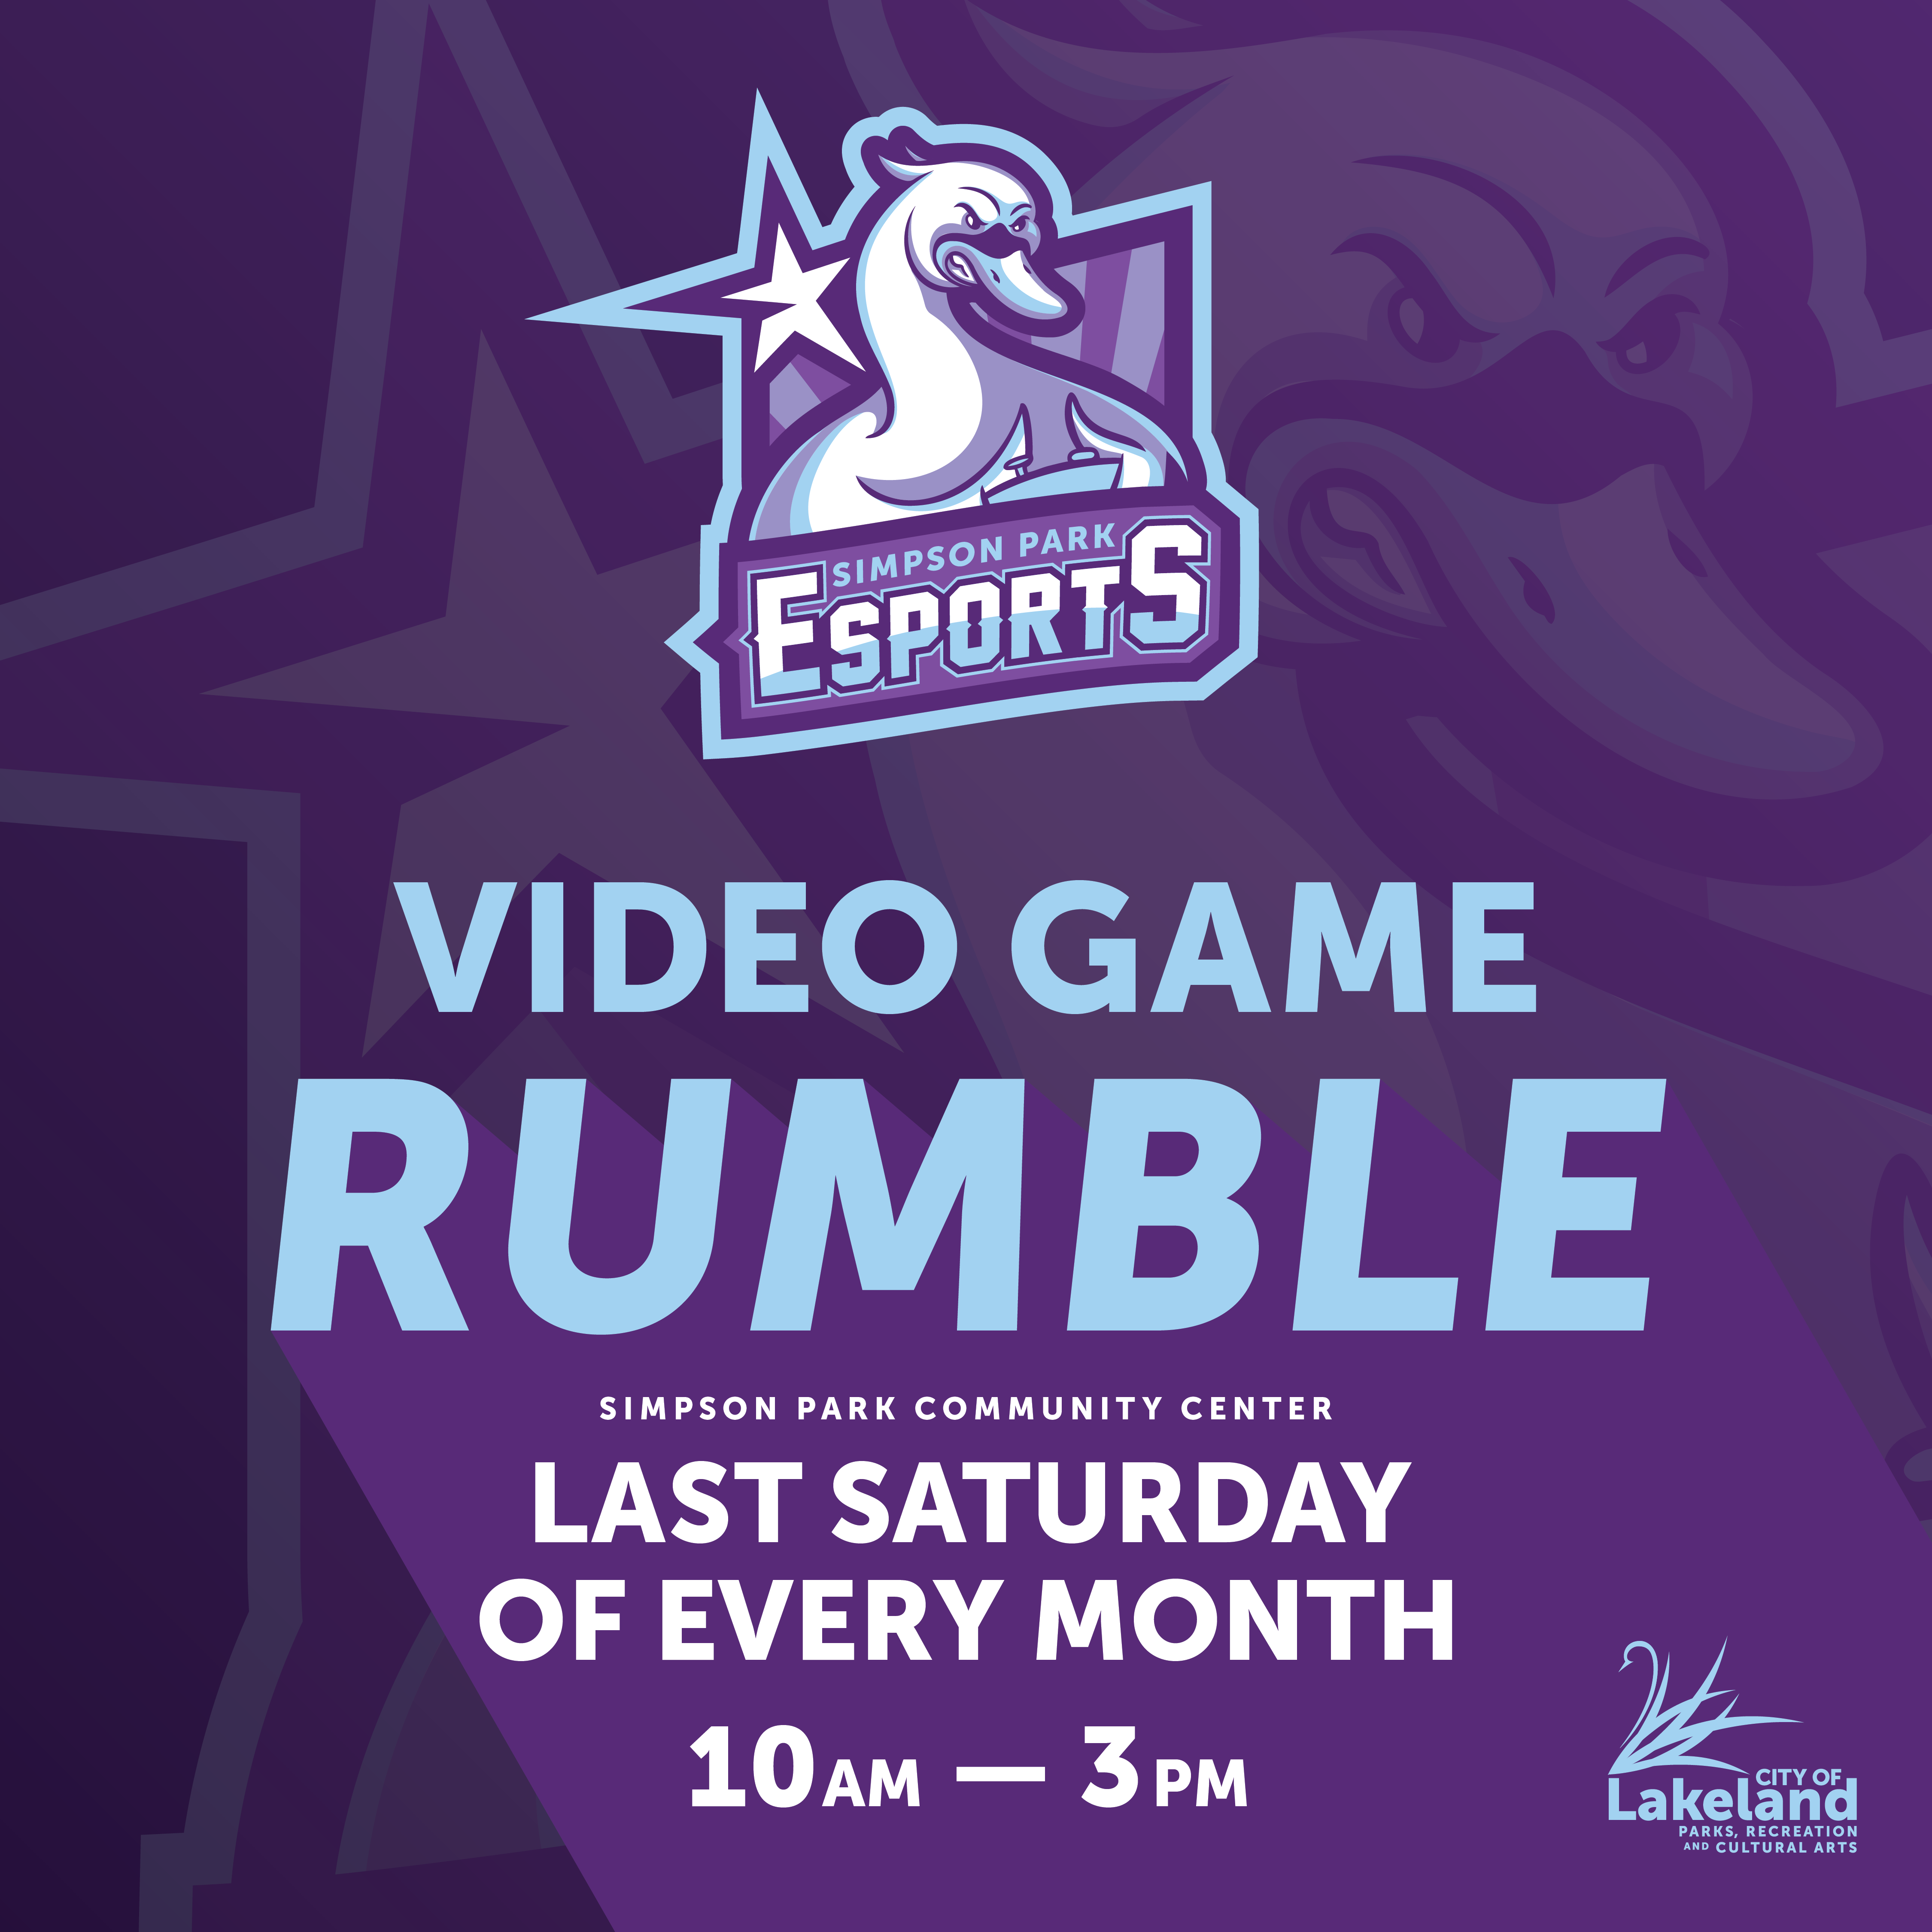 Video Game Rumble graphic - All info in text of the event.